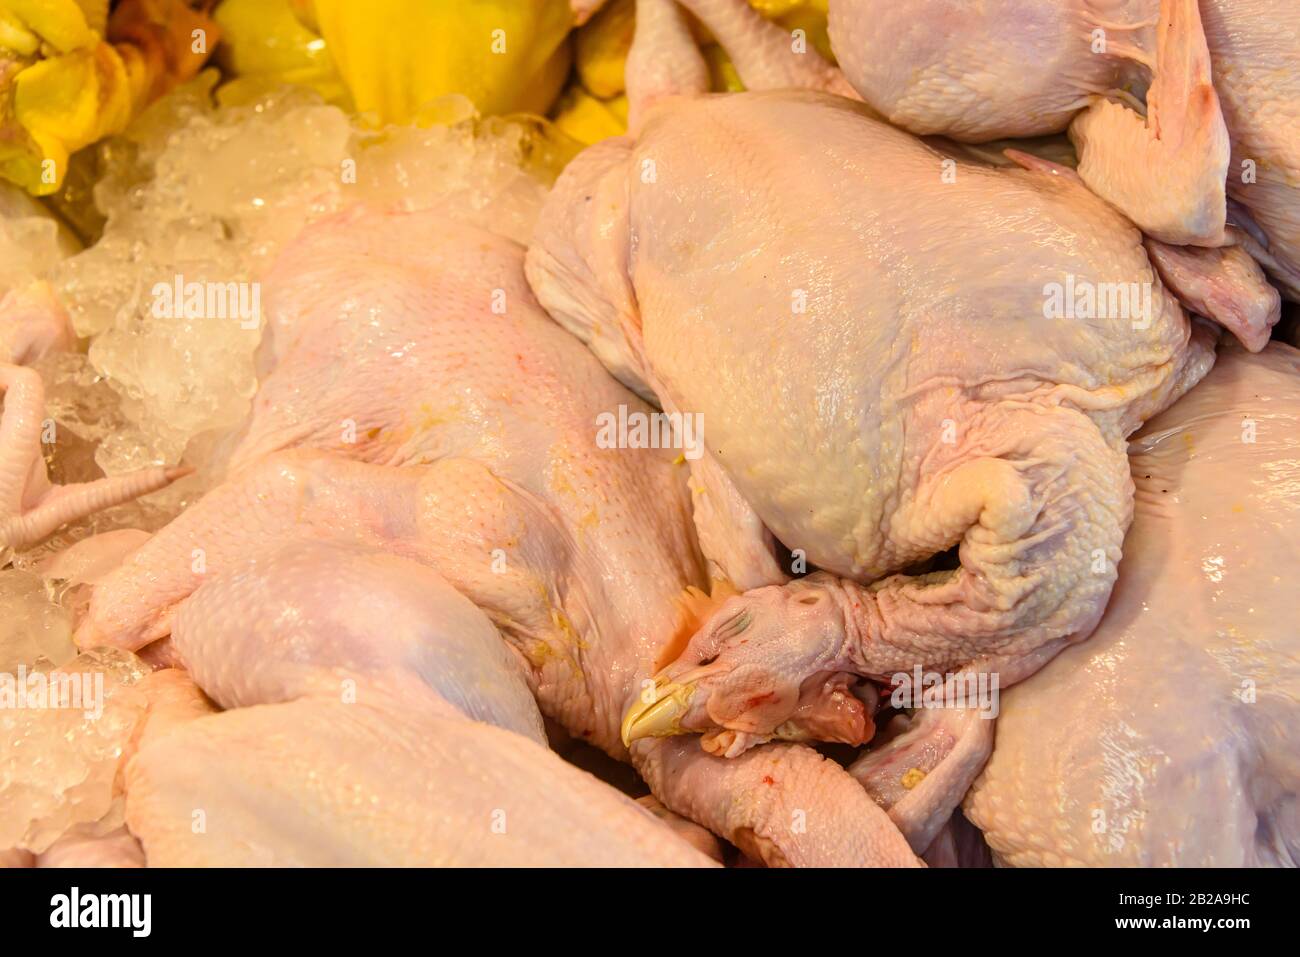 Raw chickens for sale at a Thai butchers food market stall, Thailand Stock Photo